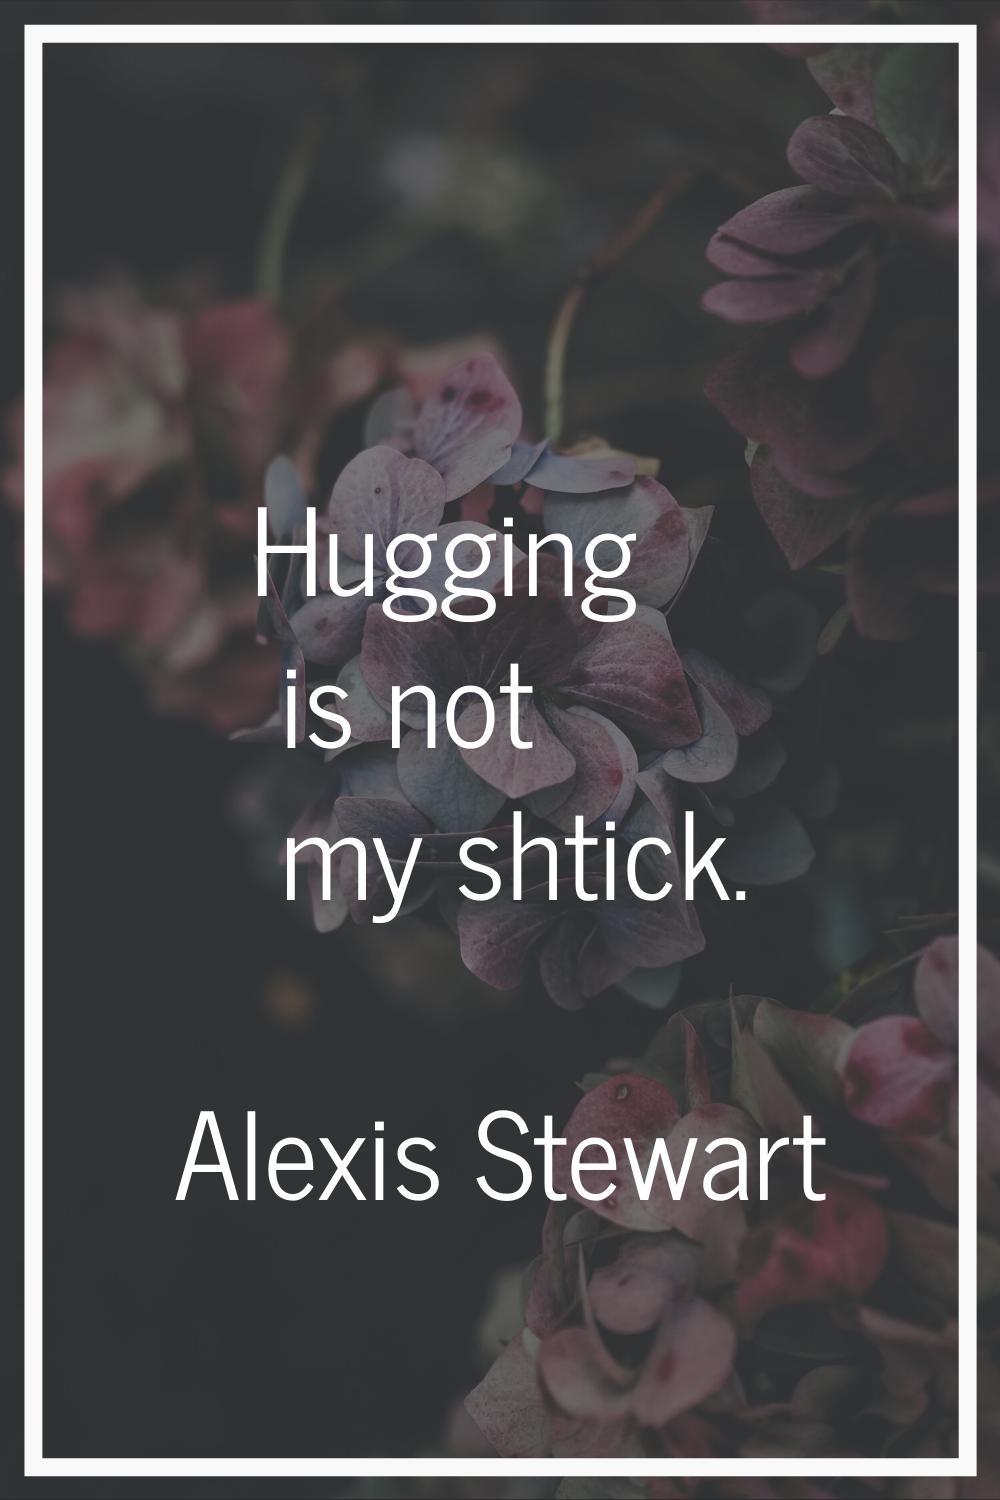 Hugging is not my shtick.